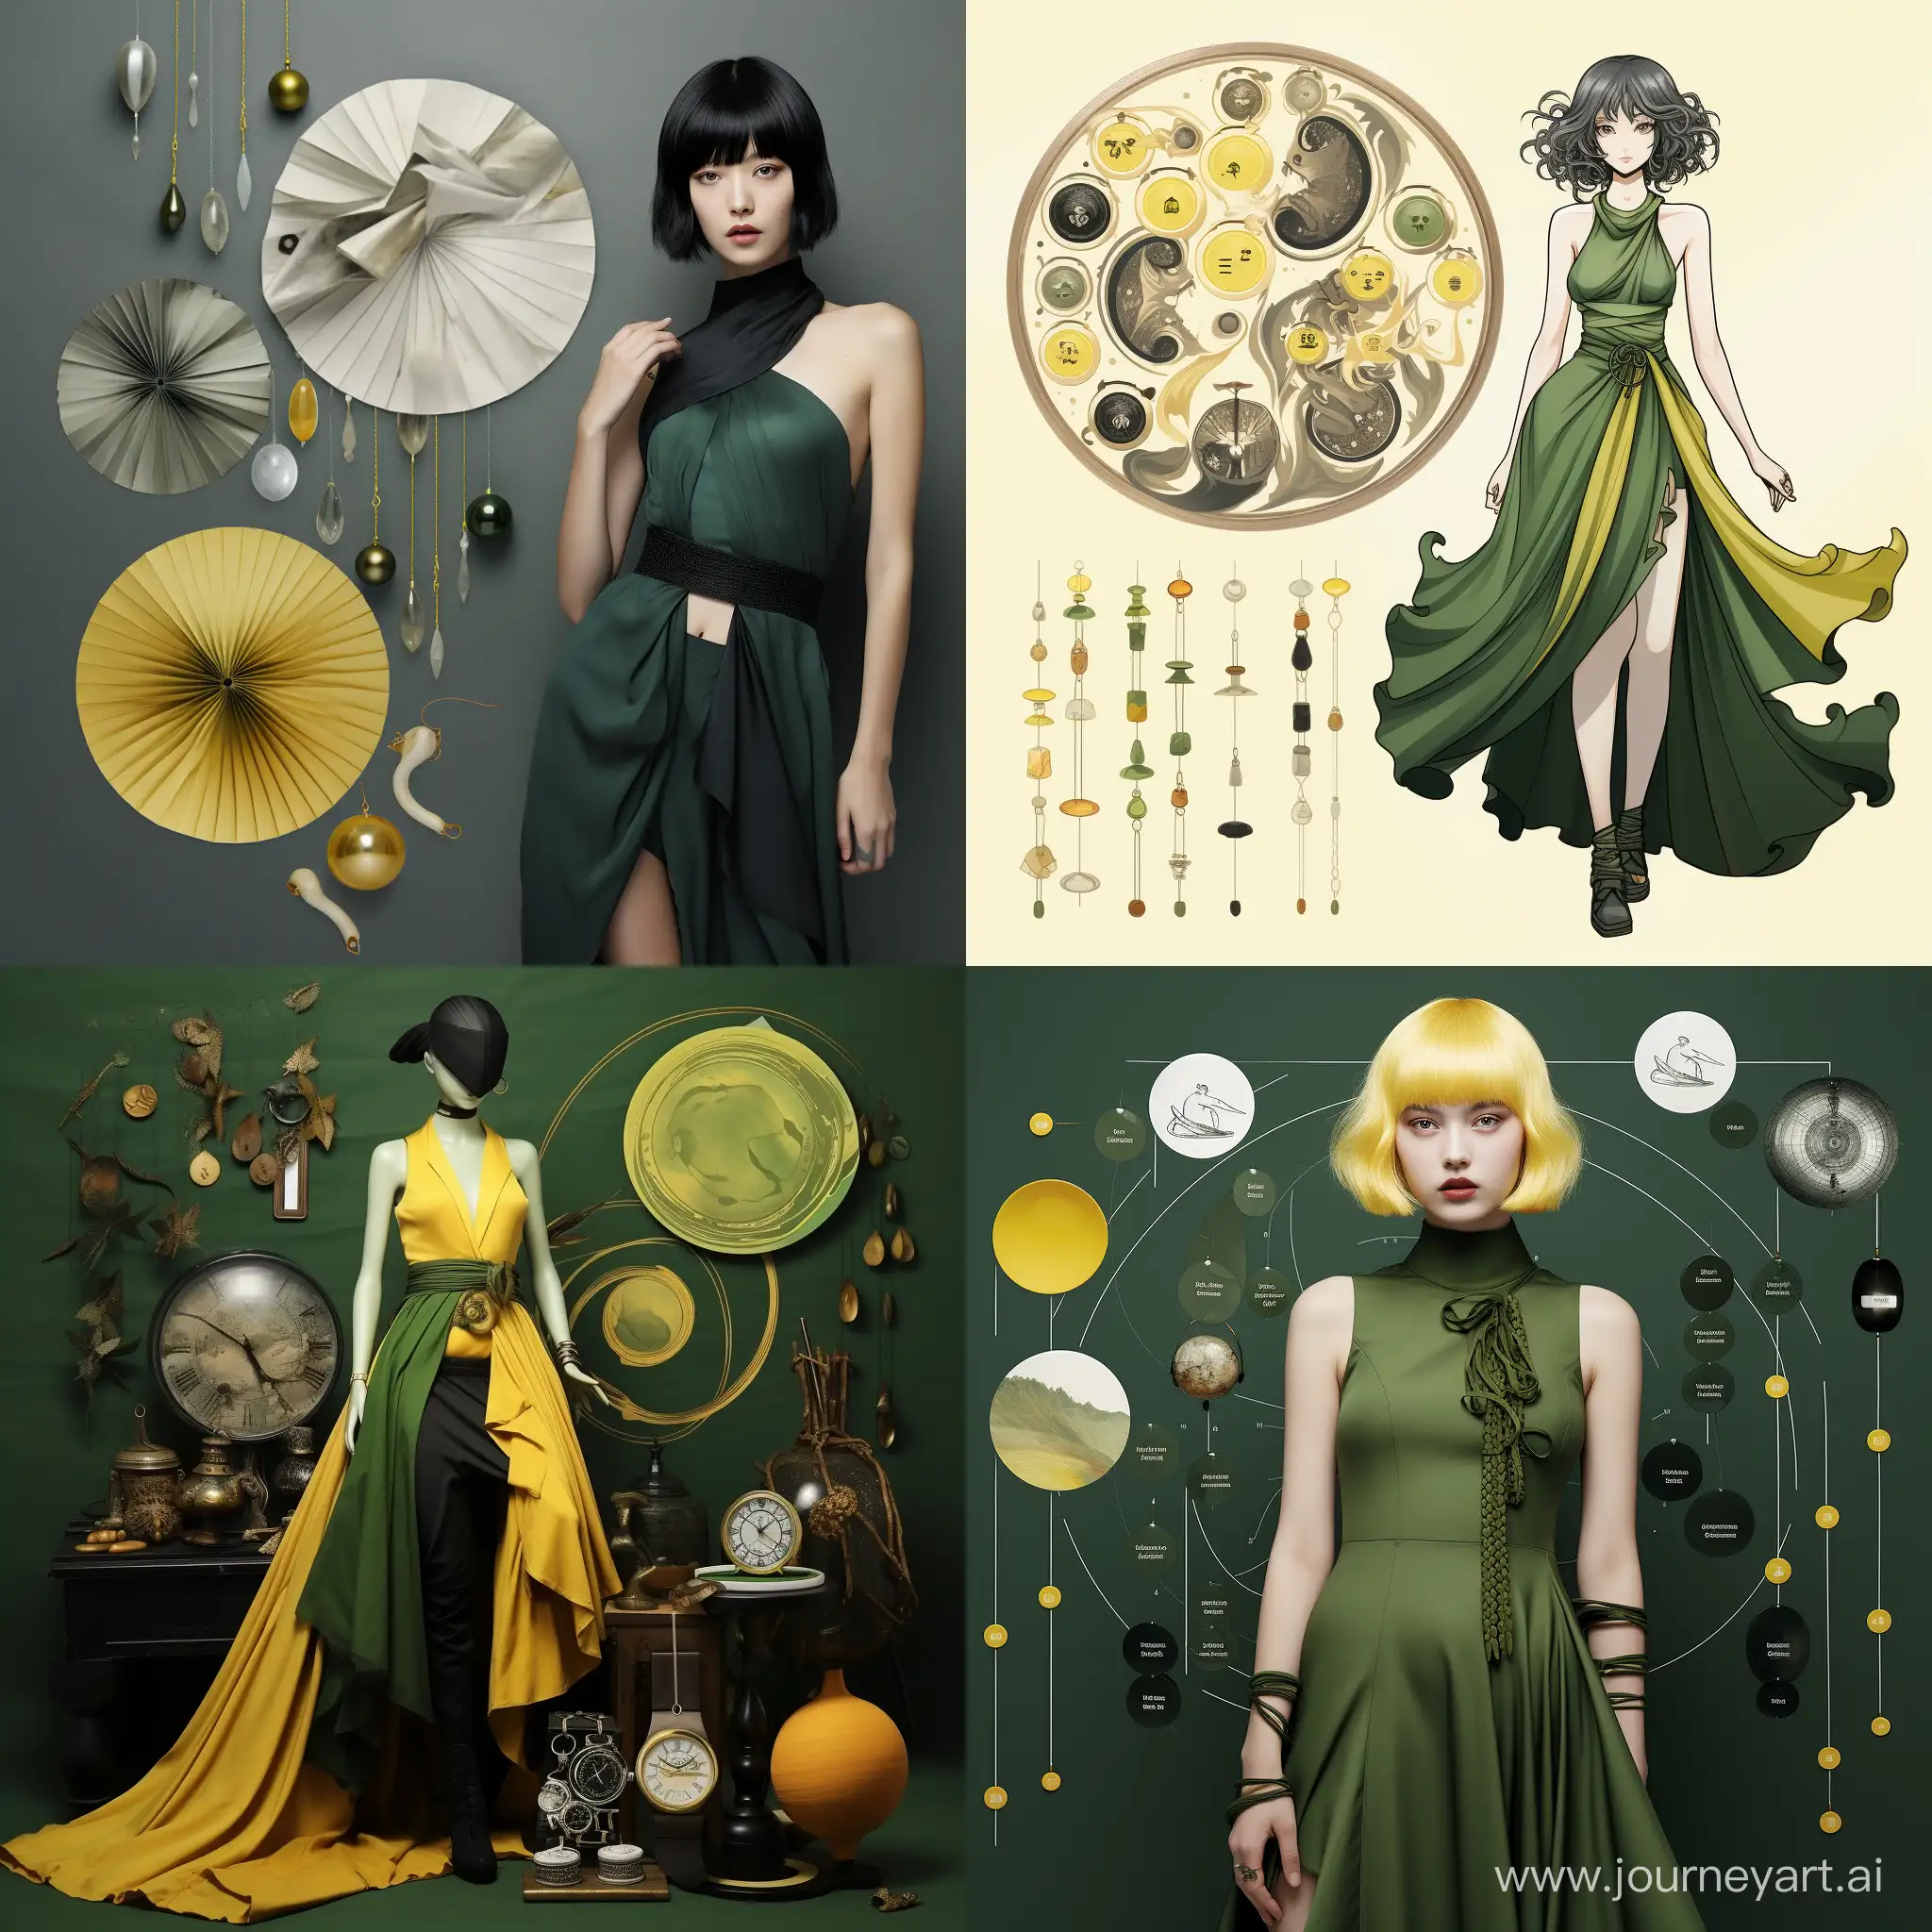 reference sheet with accessories, Yellow-green dress in Yin Yang style, reference sheet with accessories